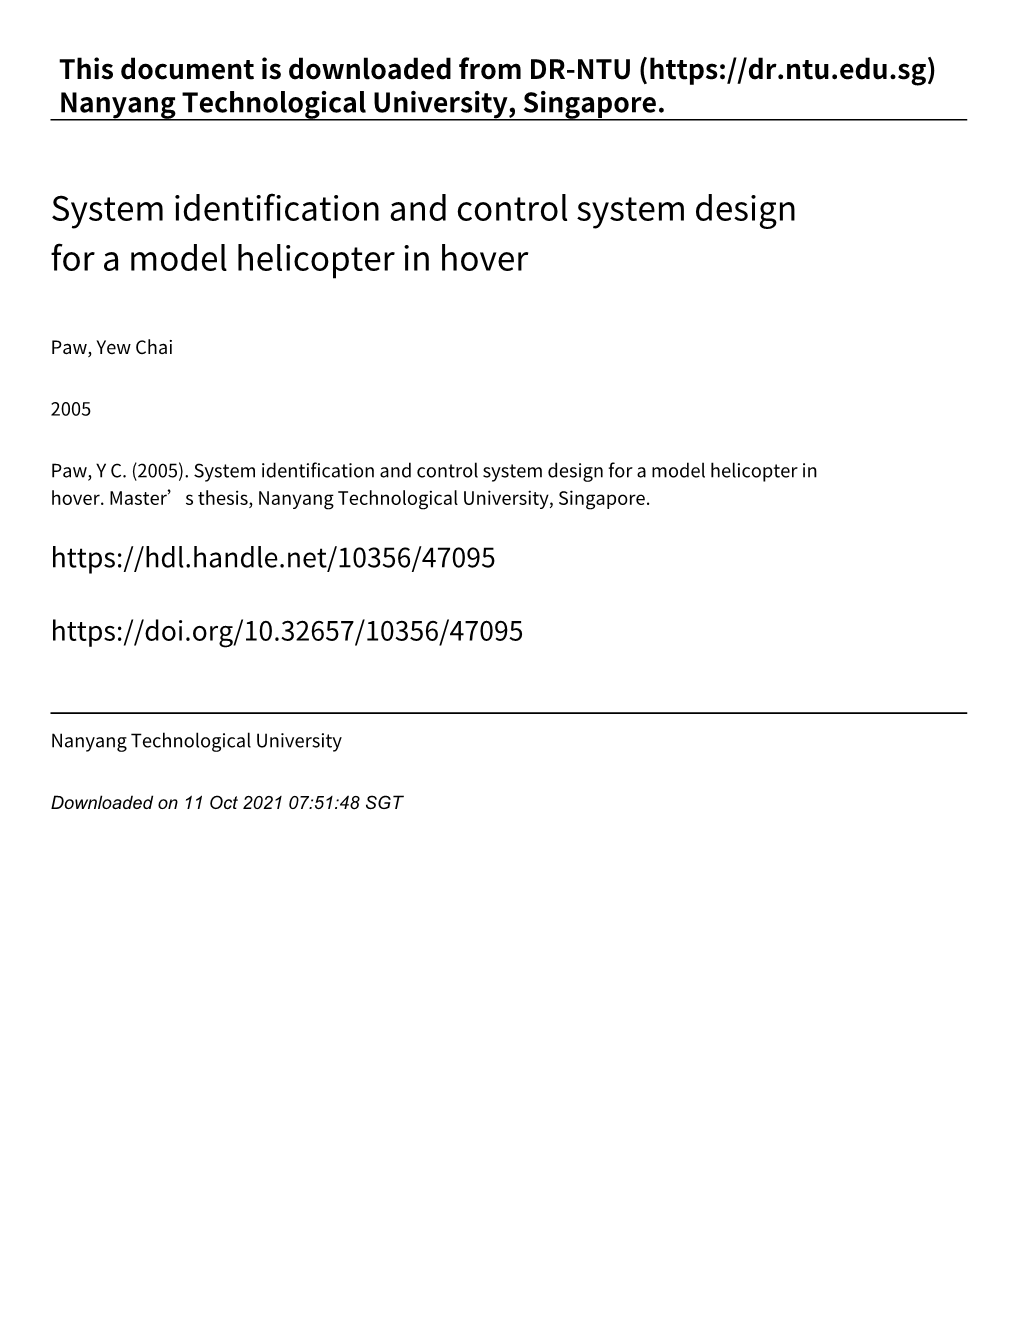 System Identification and Control System Design for a Model Helicopter in Hover